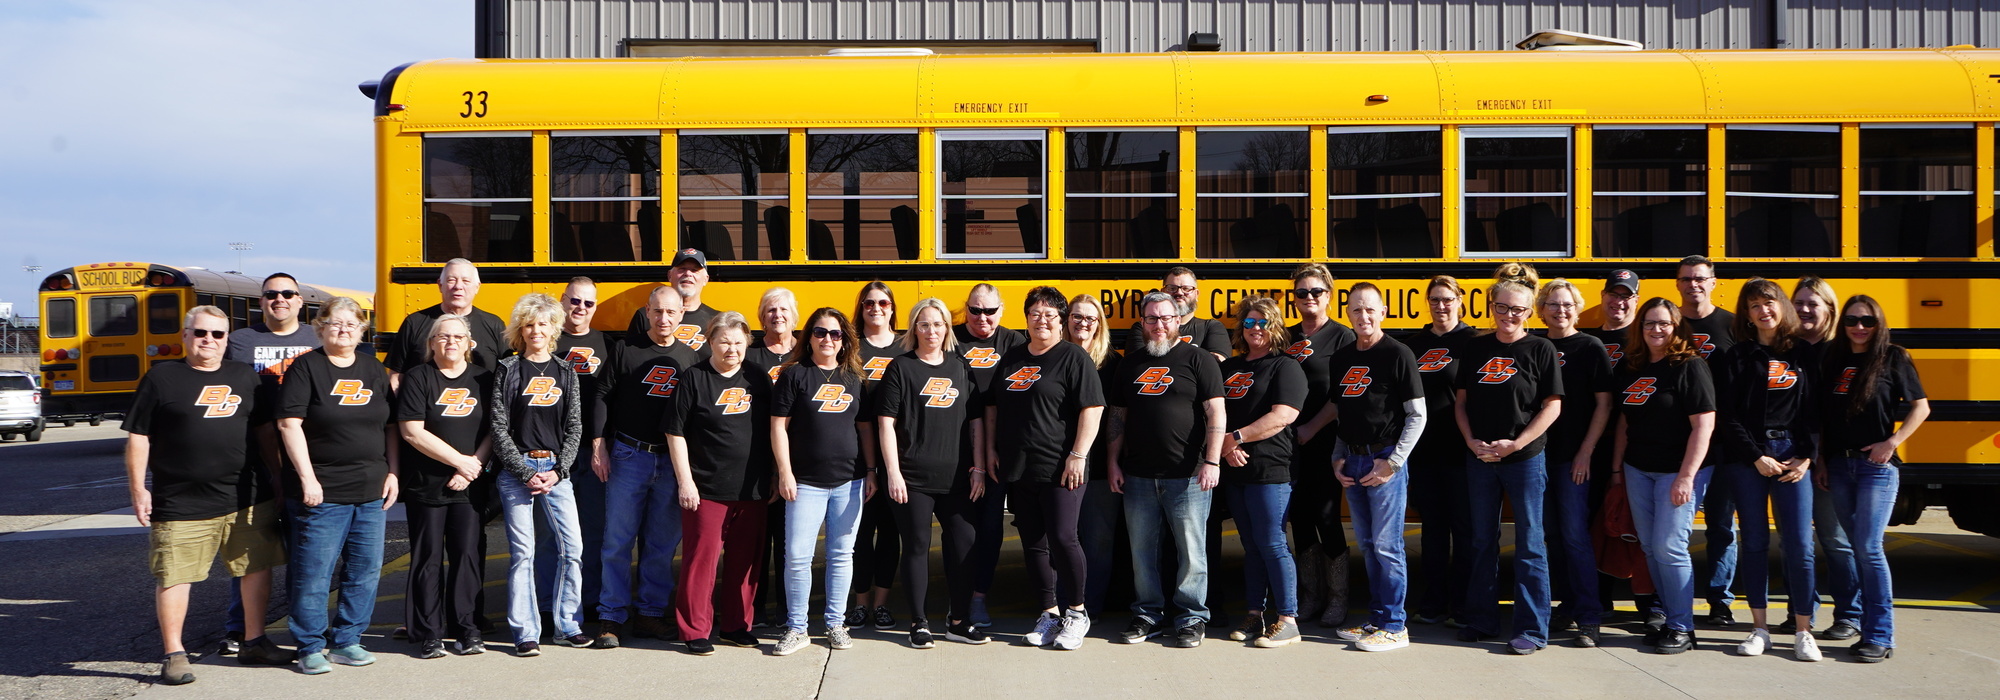 We LOVE our bus drivers!